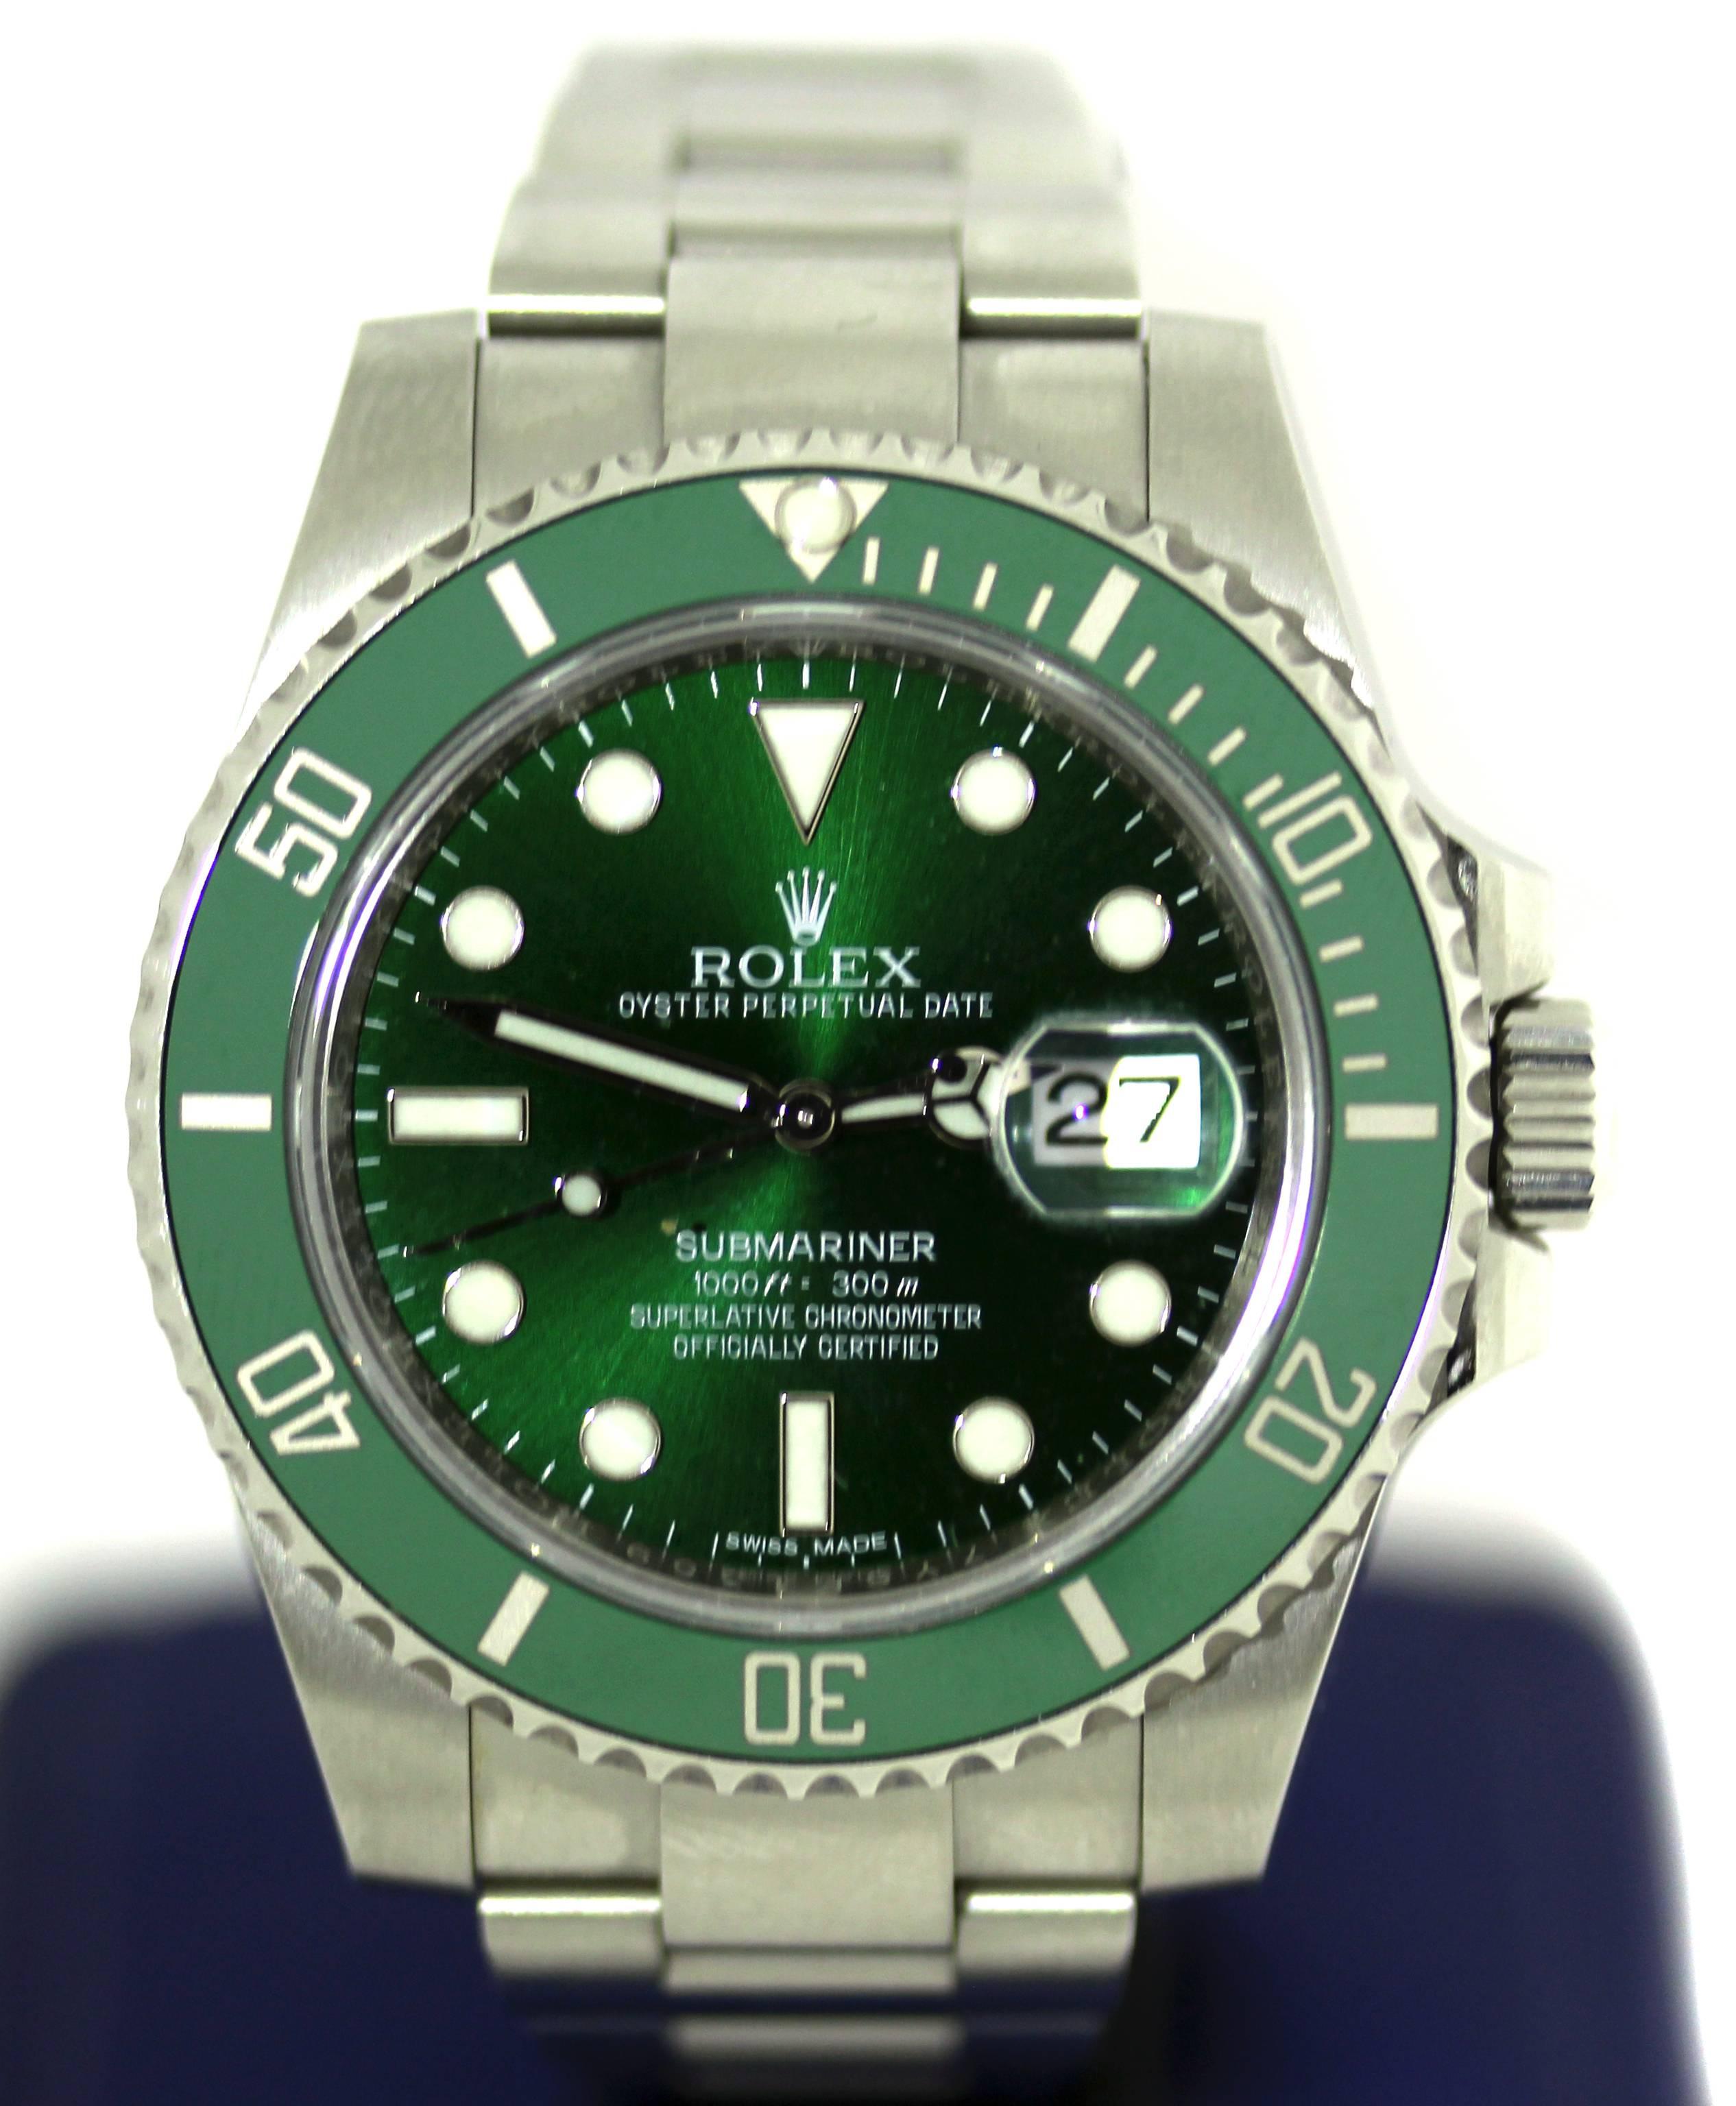 Gently used, in excellent condition

40mm Rolex Submariner Green Dial Hulk Watch

Pressure proof up to 1,000 feet

Box and papers not included

Reference: 116610LV 

Release in 2010

